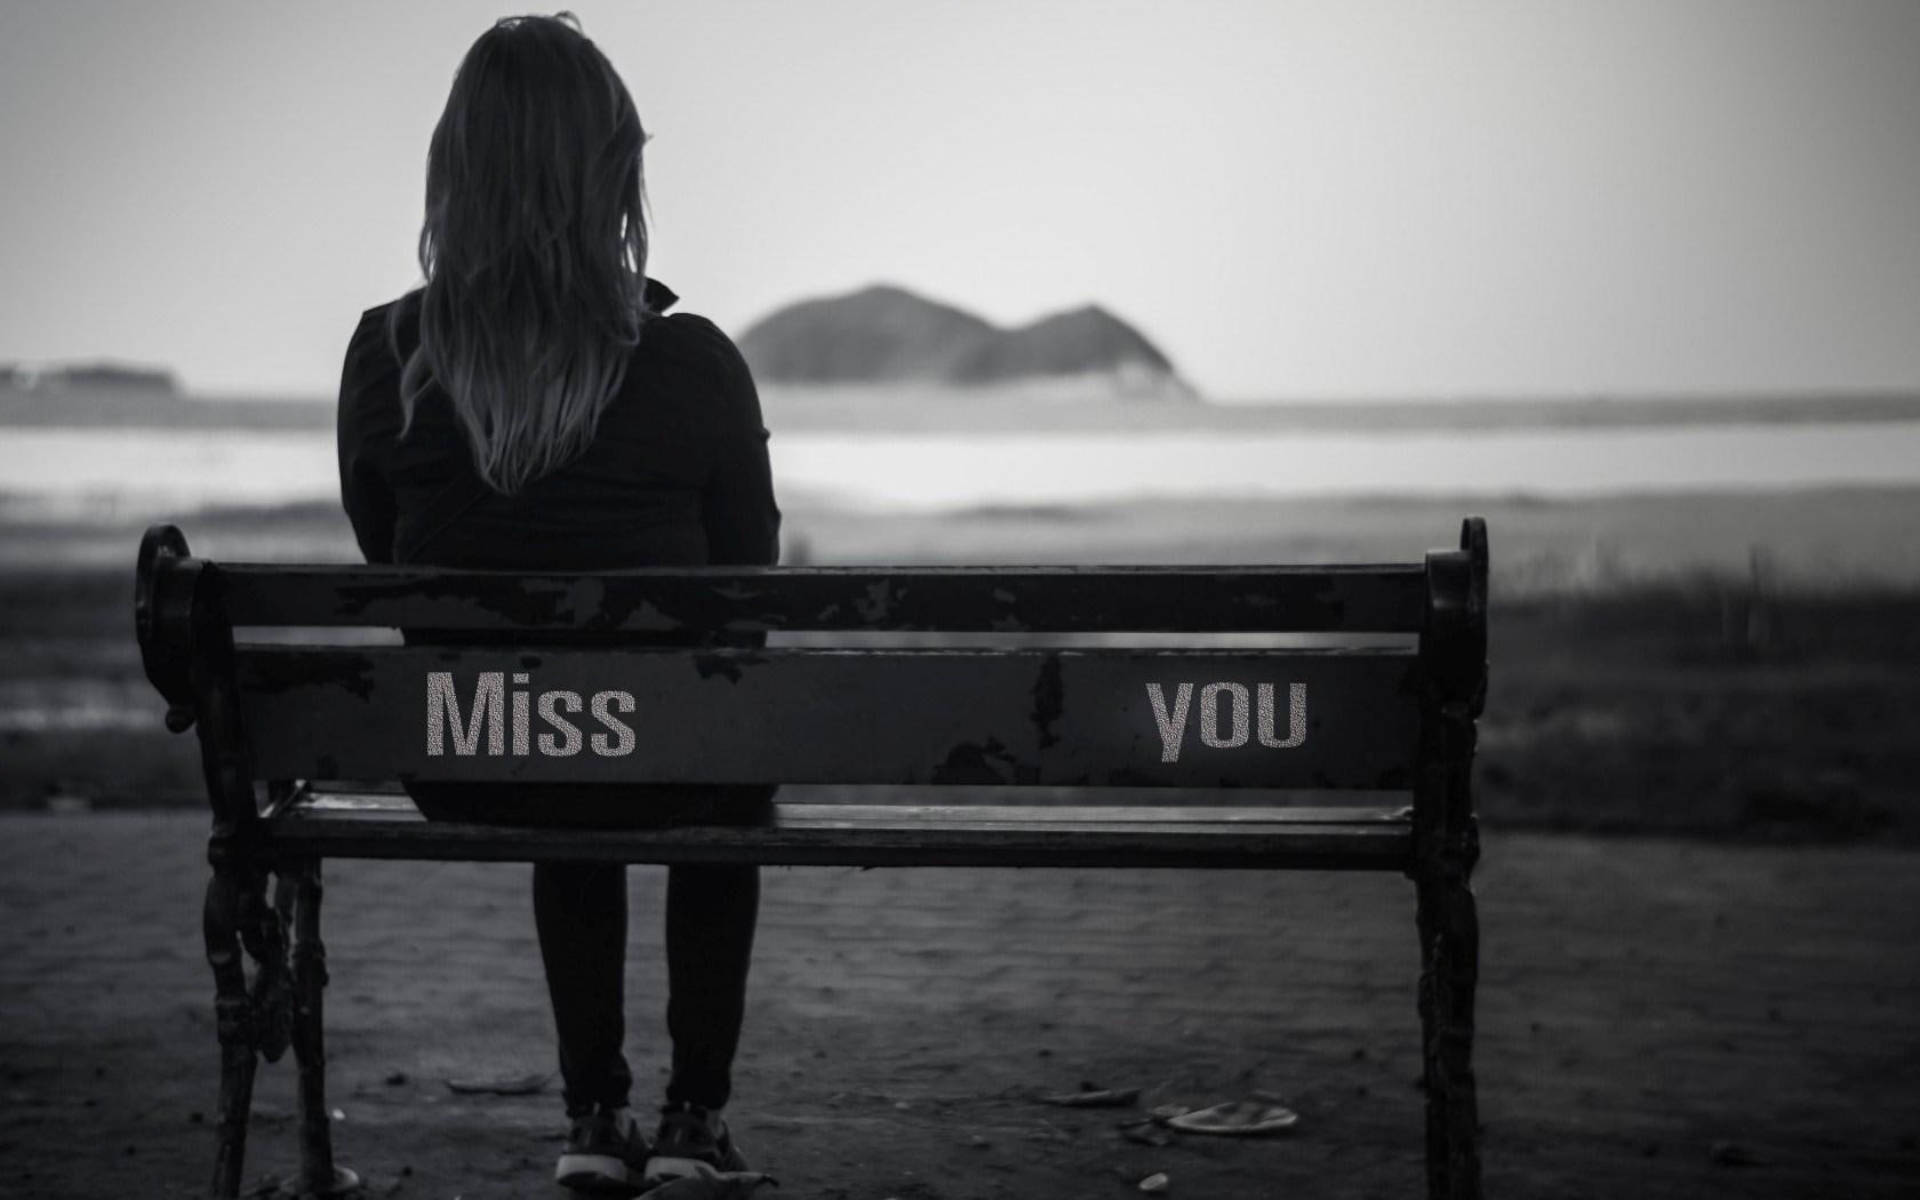 Missing You Alone On Bench Background